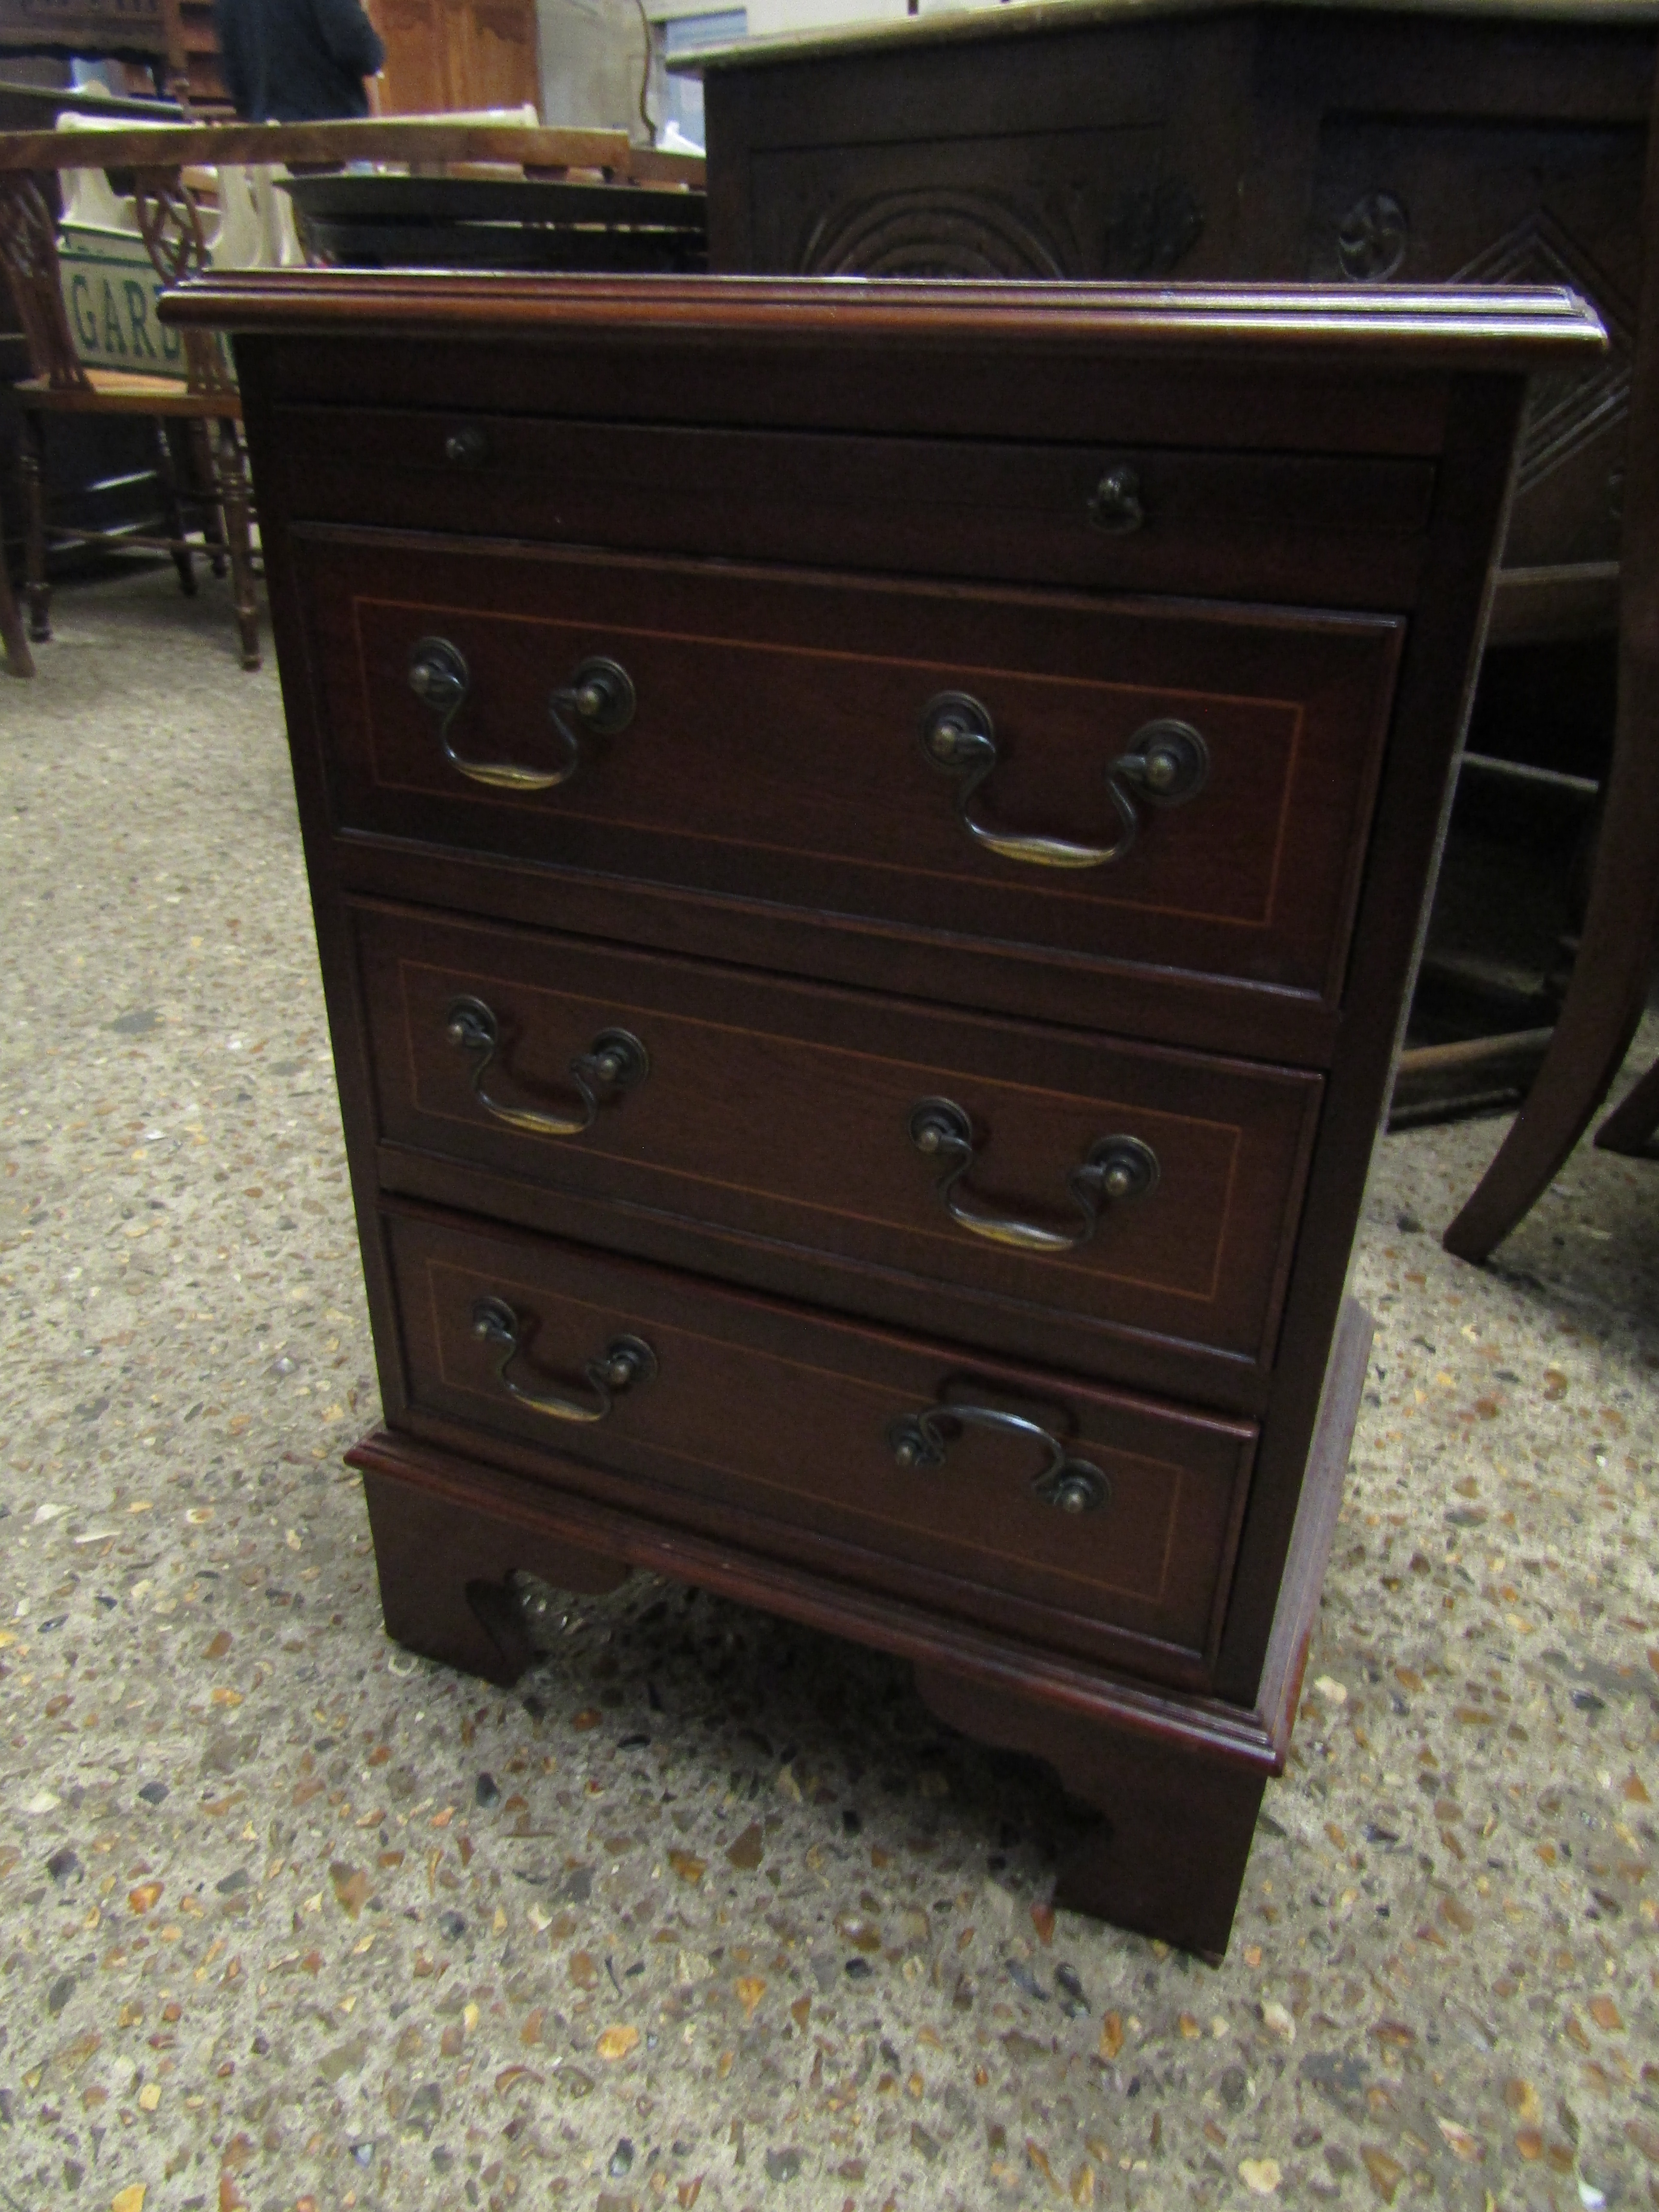 REPRODUCTION SMALL BACHELOR’S CHEST WITH SINGLE DRAWER OVER THREE DRAWERS ON BRACKET FEET